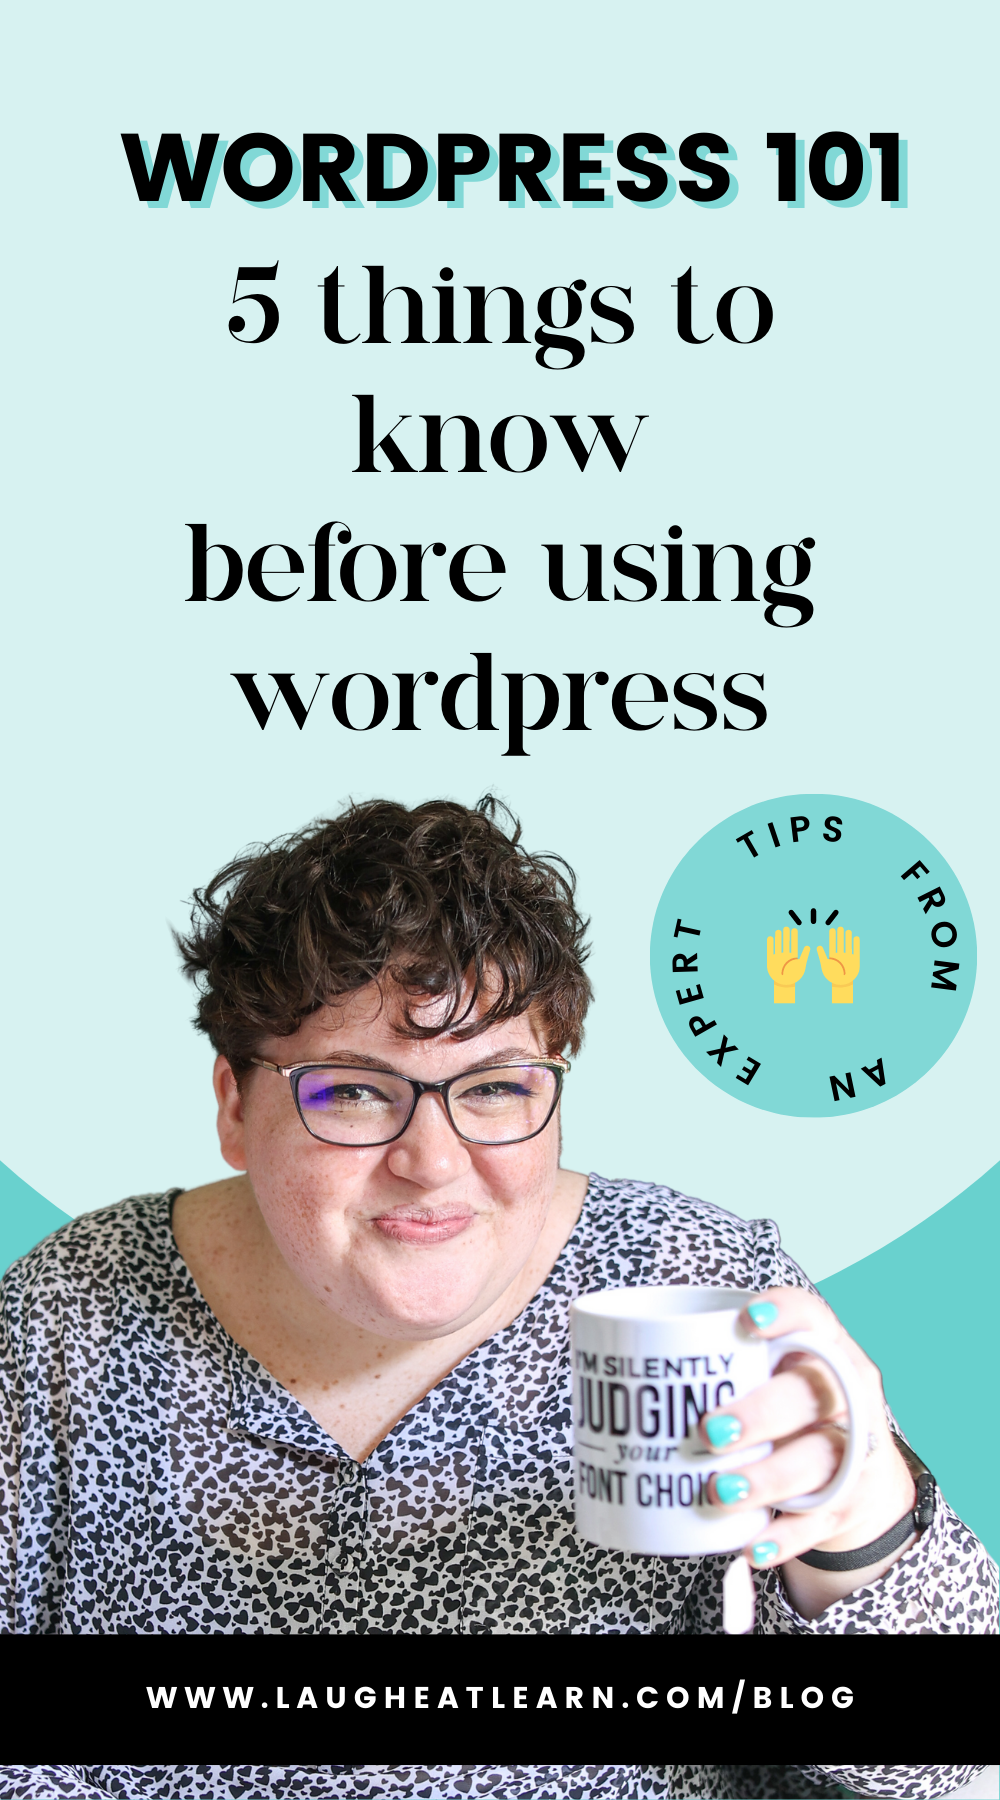 Pin that says "WordPress 101: things to know before using WordPress" and has a picture of Alexis with a mug of coffee